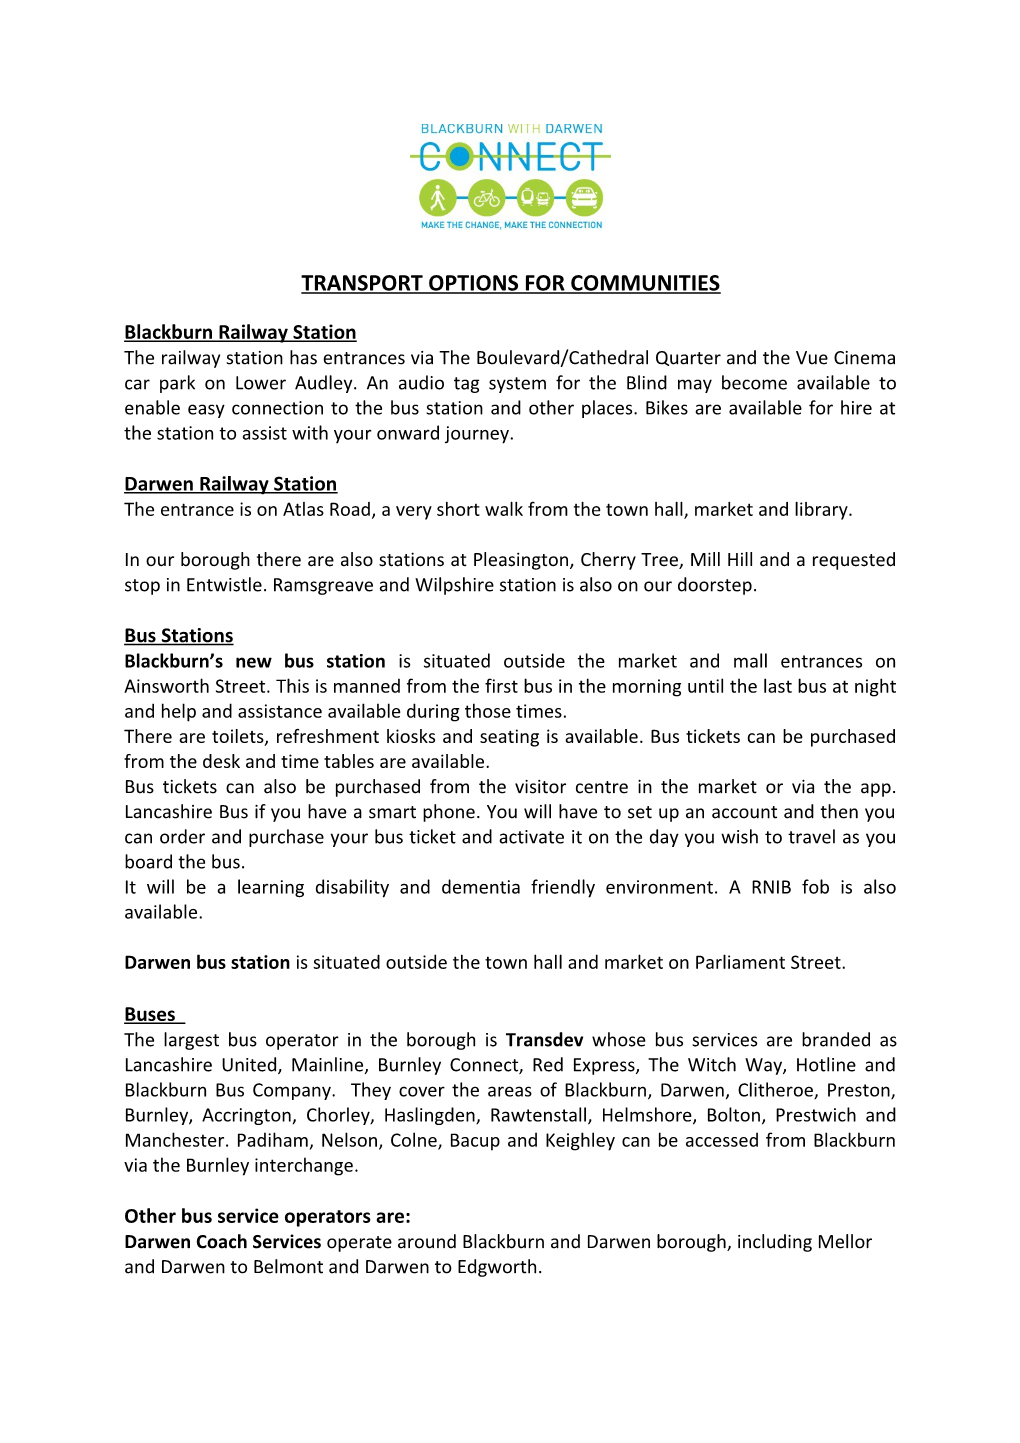 Transport Options for Communities